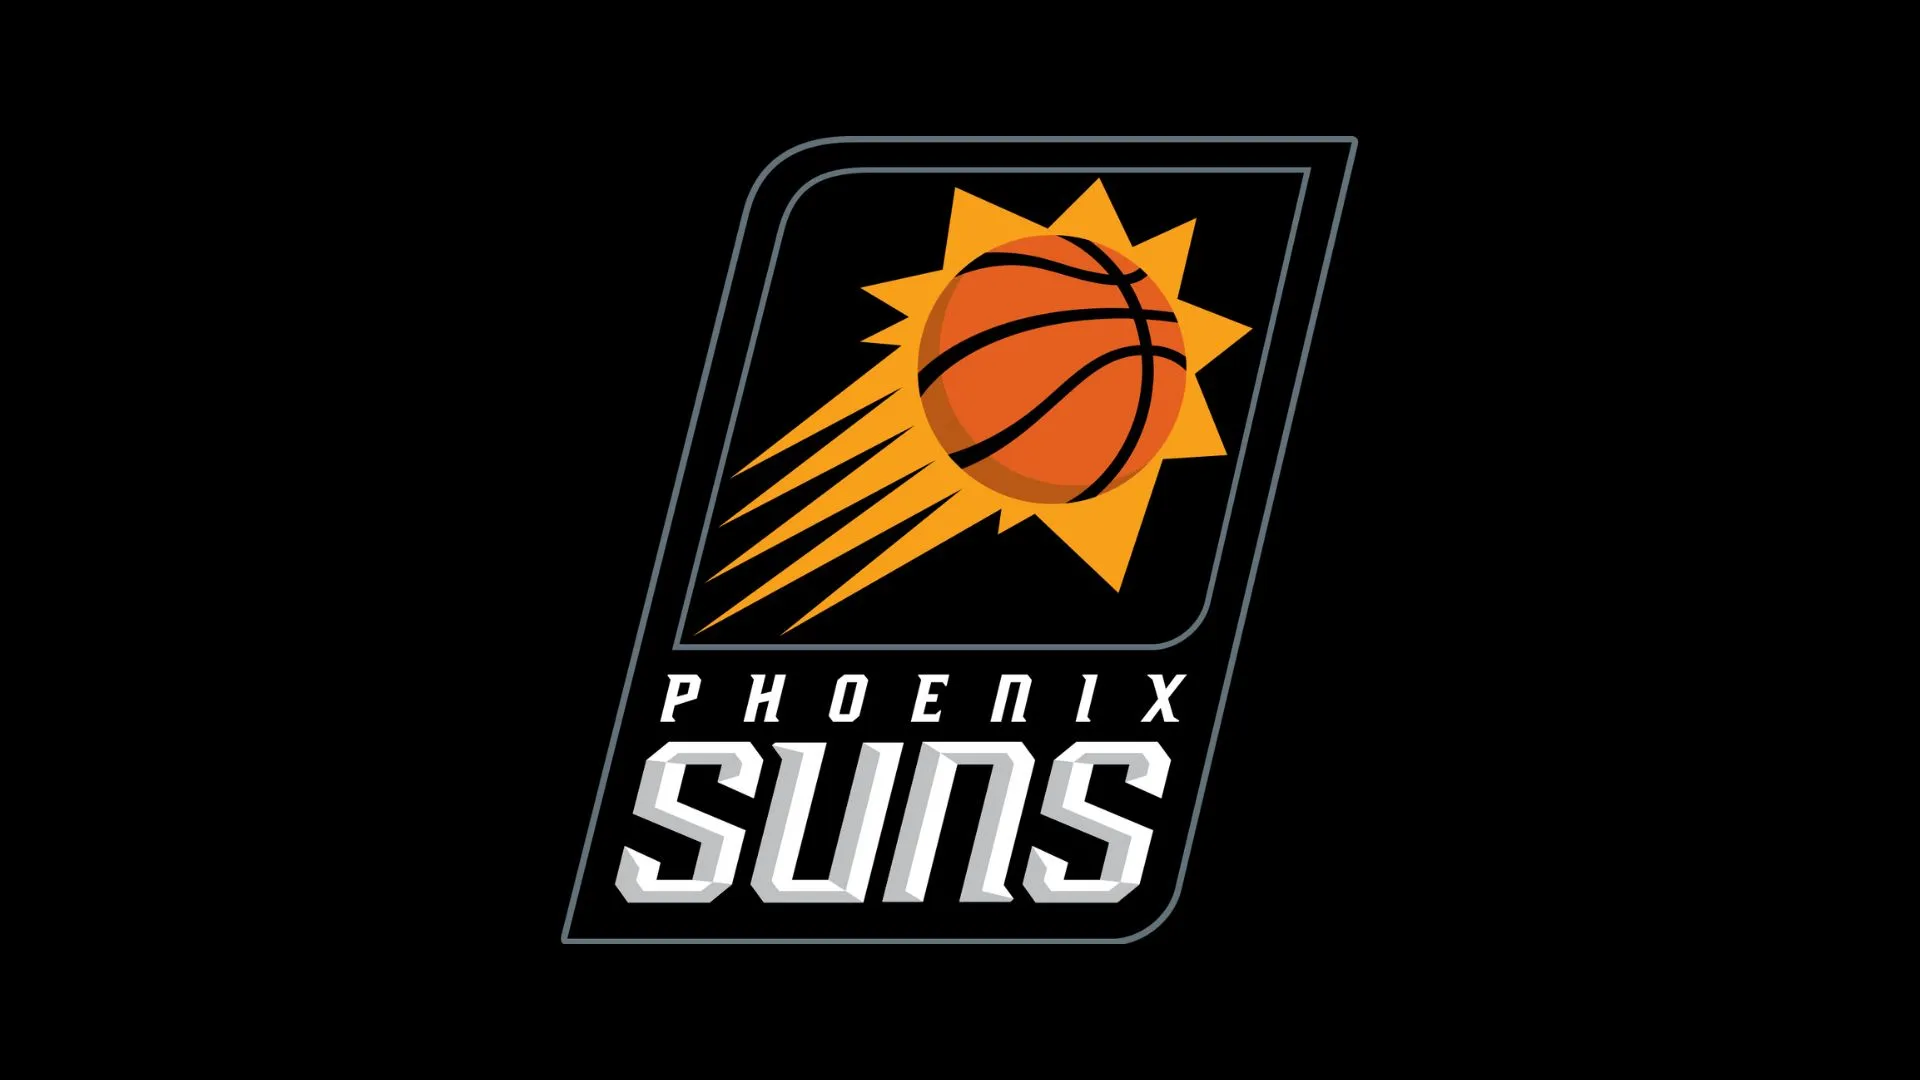 Who is the Owner of the Phoenix Suns?